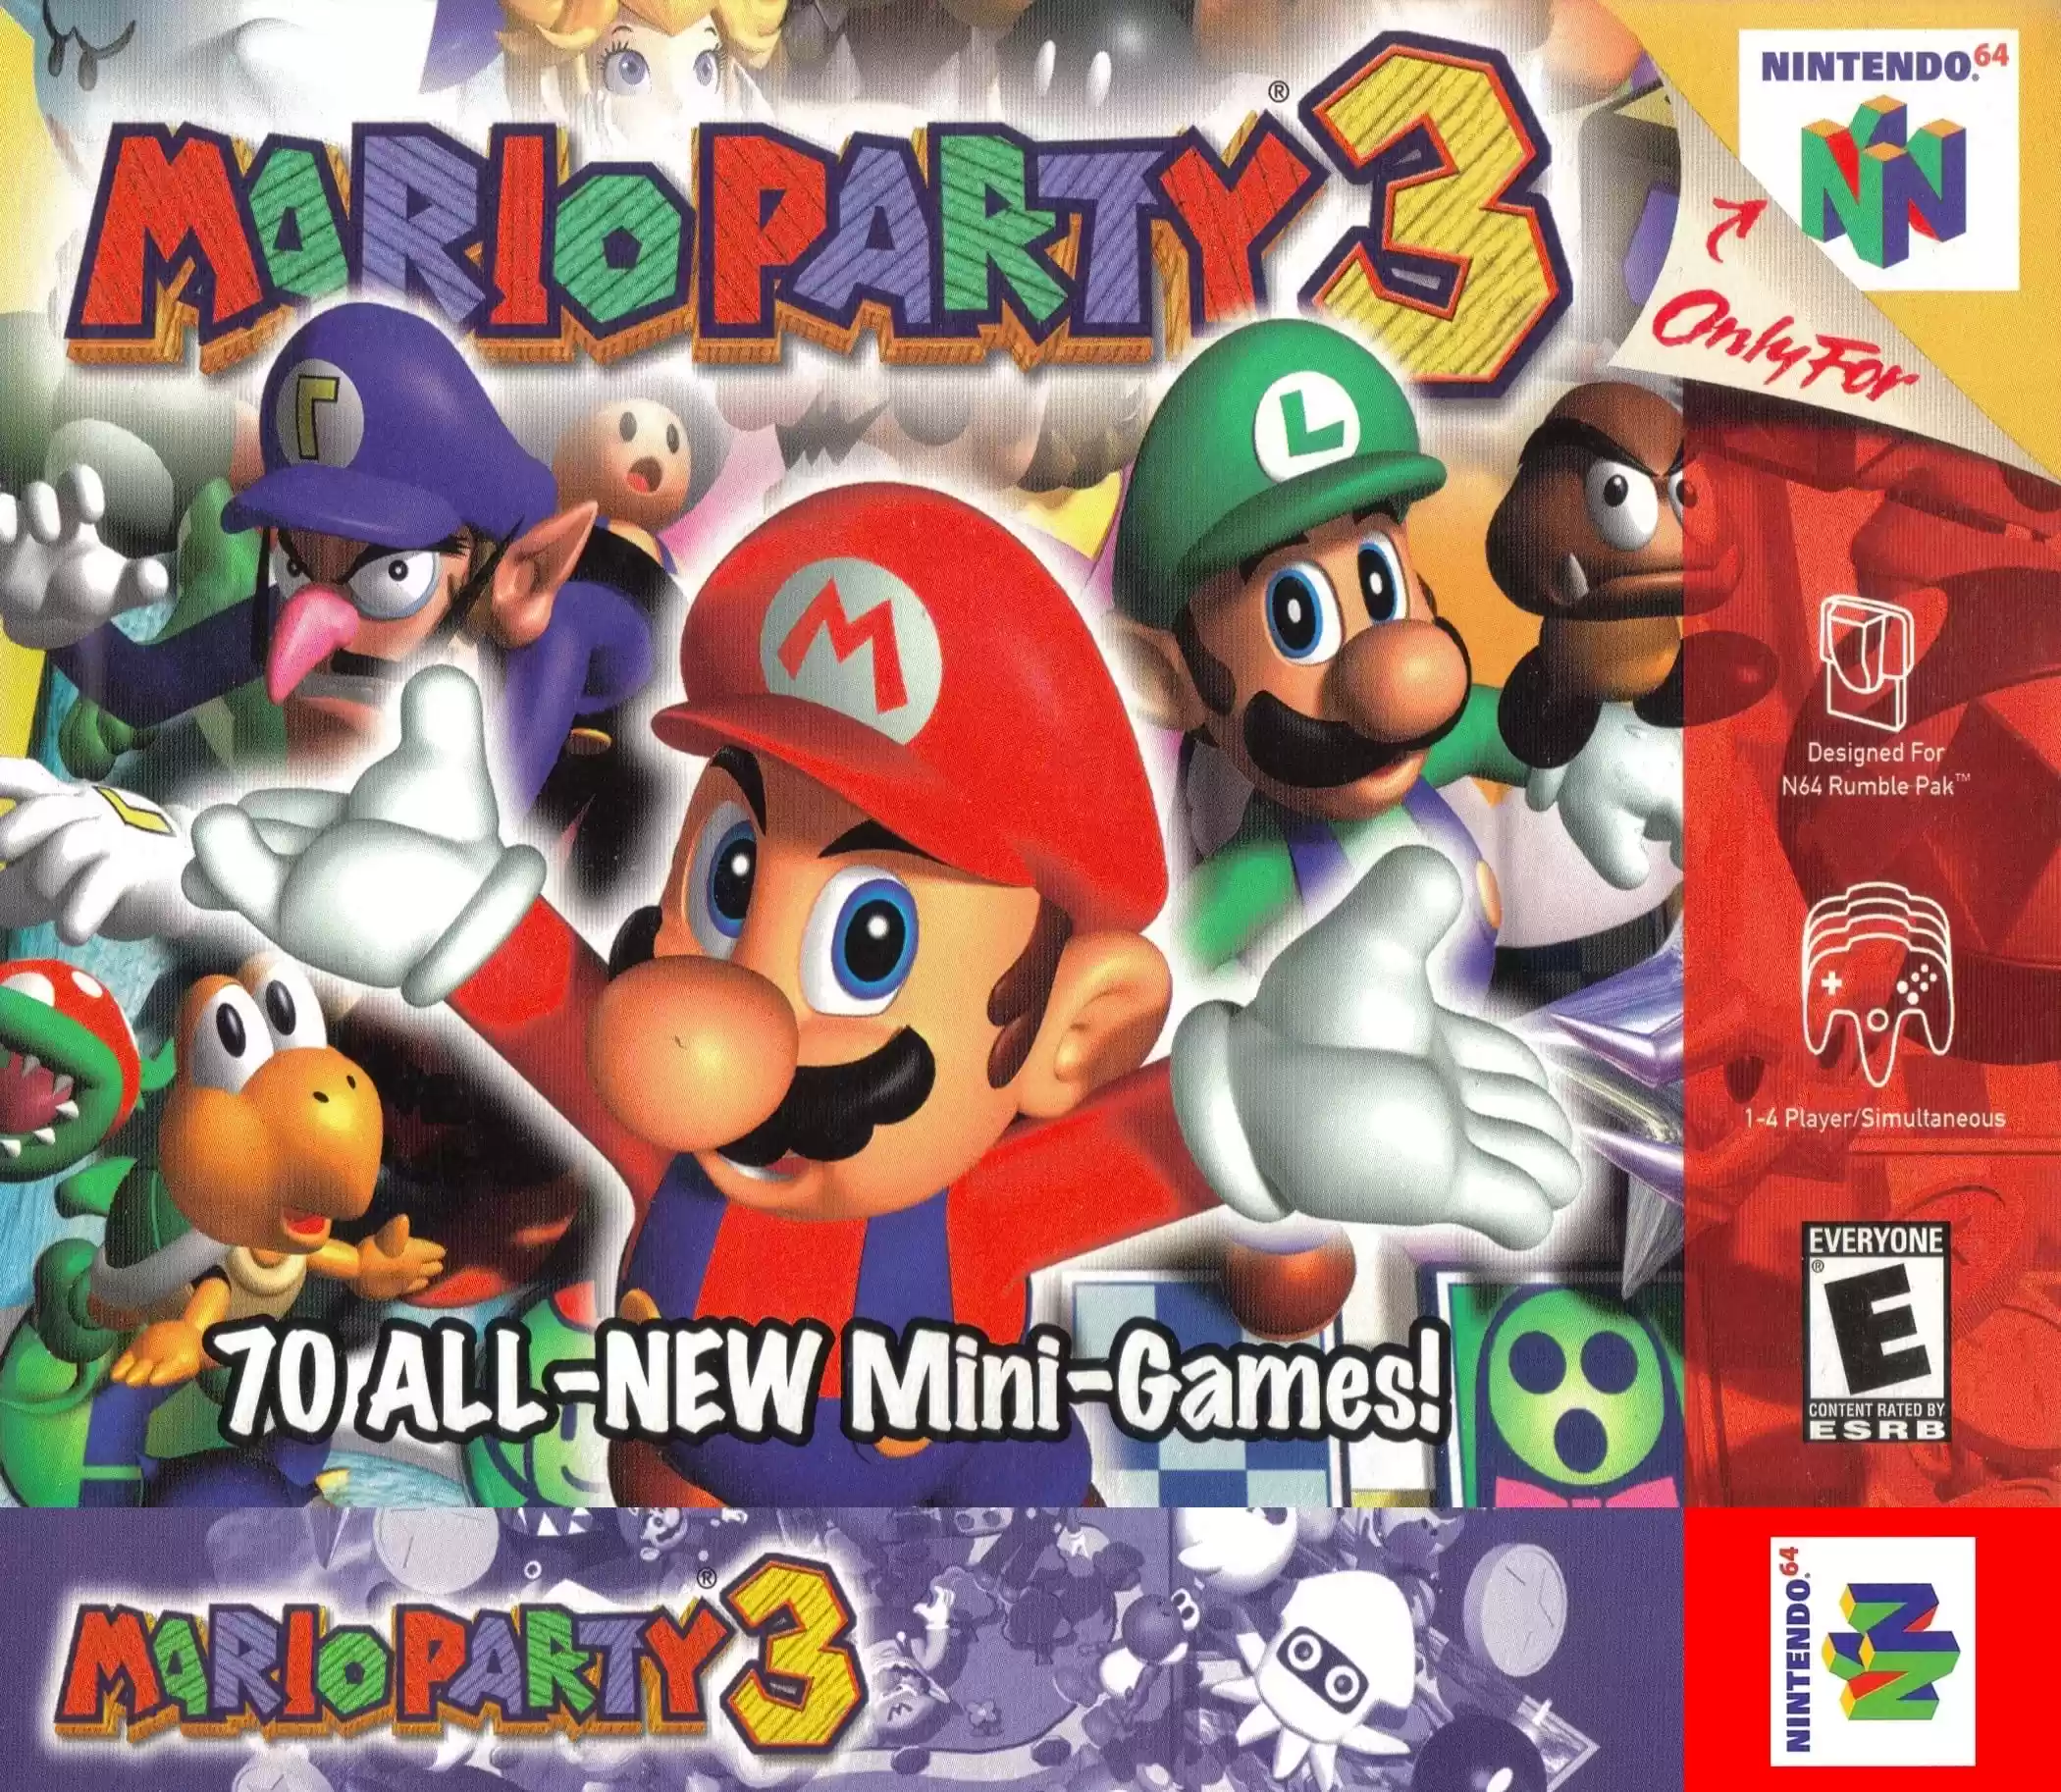 N64® Mario Party 3 game box front cover.